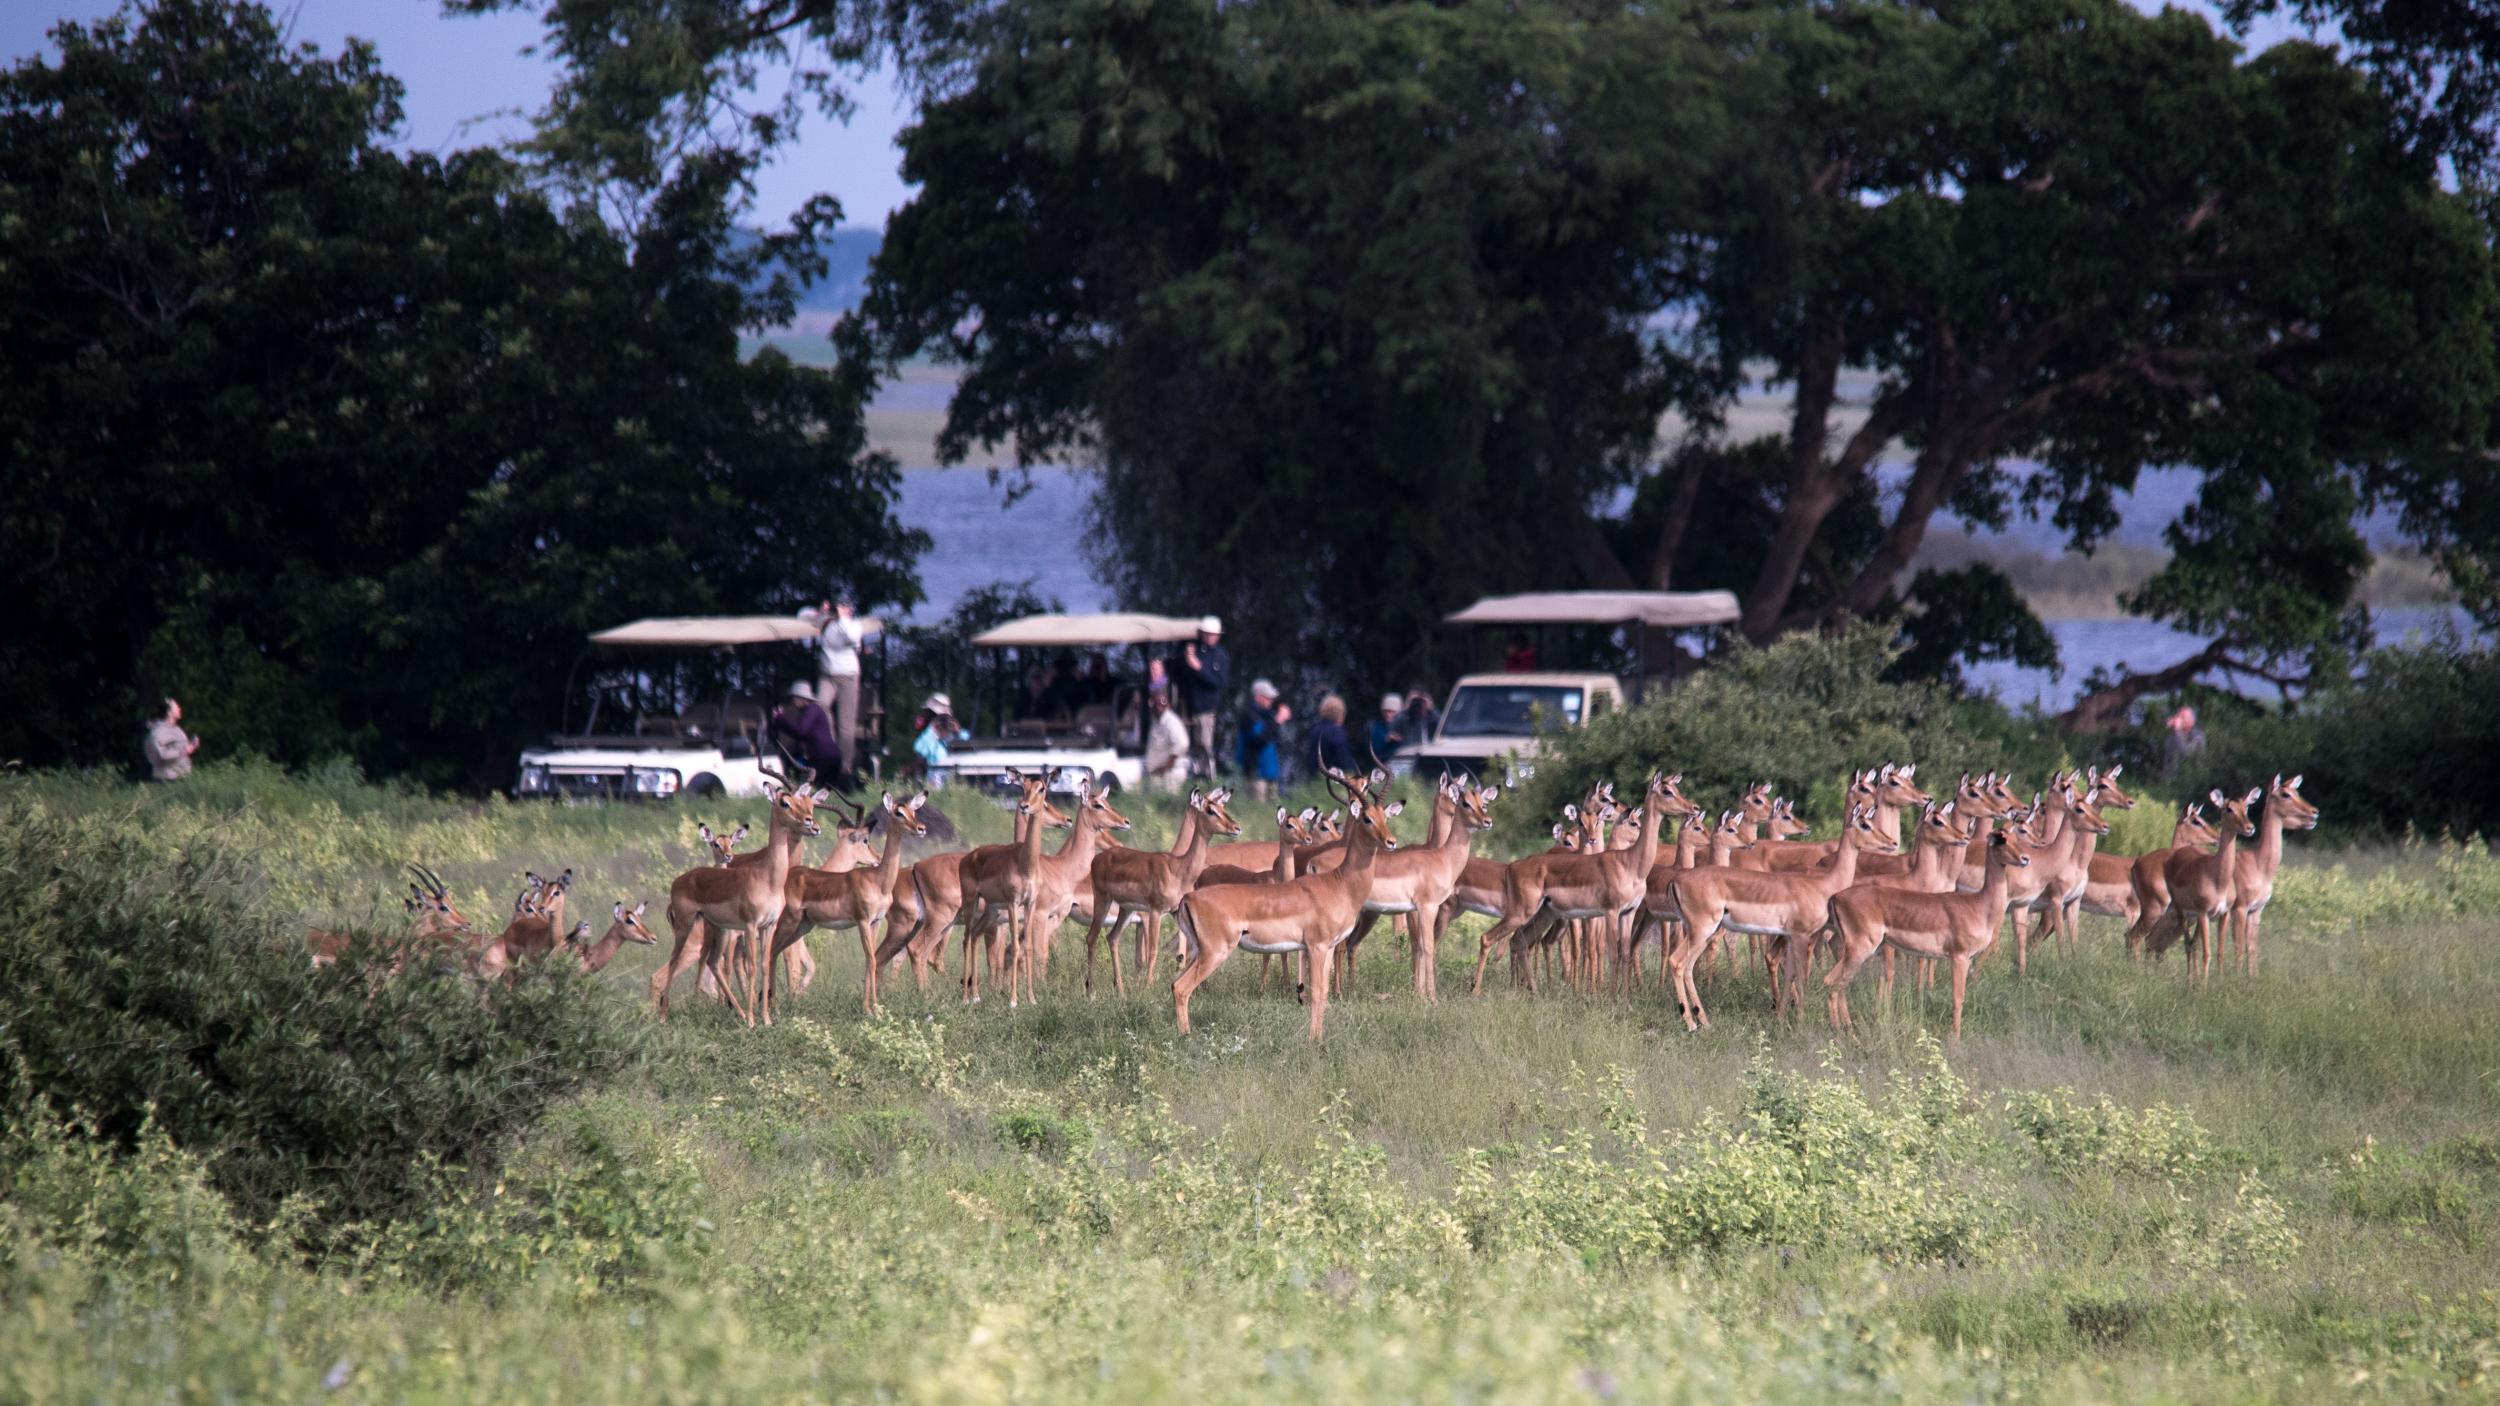 Most tourists visit sub-Saharan Africa to see wildlife